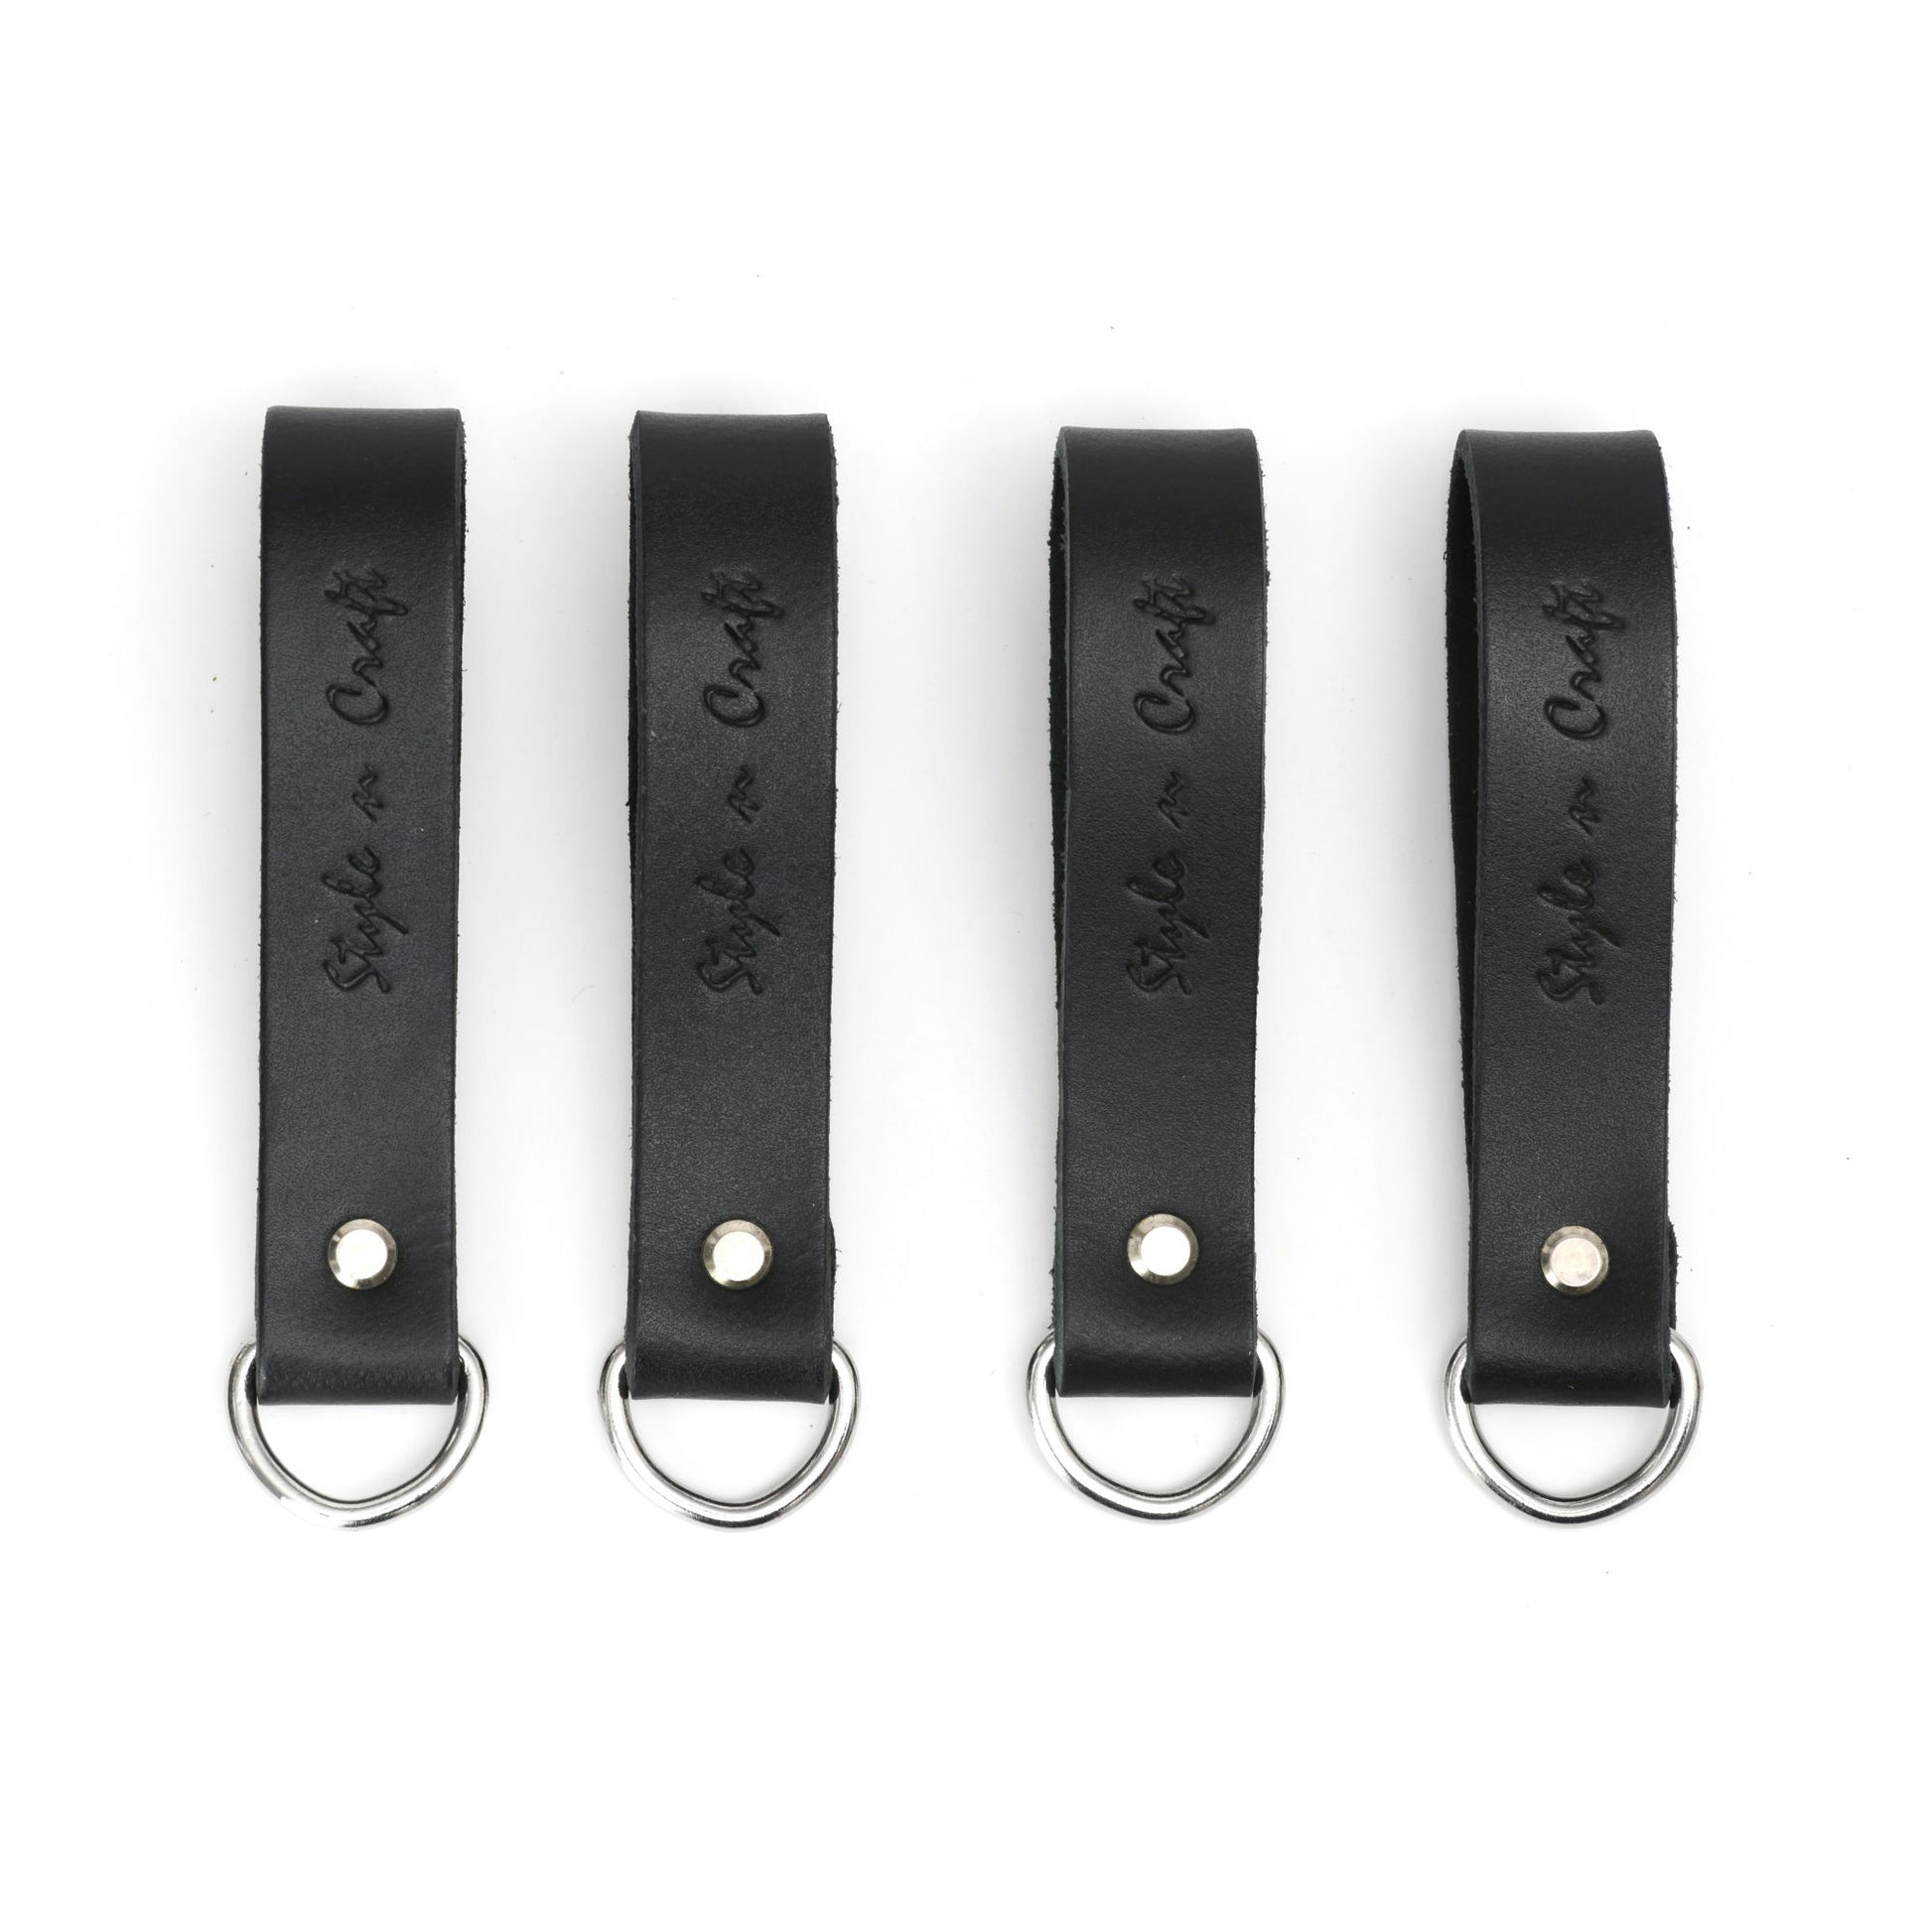 Style n Craft 75202 - Leather D-Ring Loop Set (4 Pcs) for Suspender Attachment in Black Color - Front View. Each Set Contains 4 Leather Loops